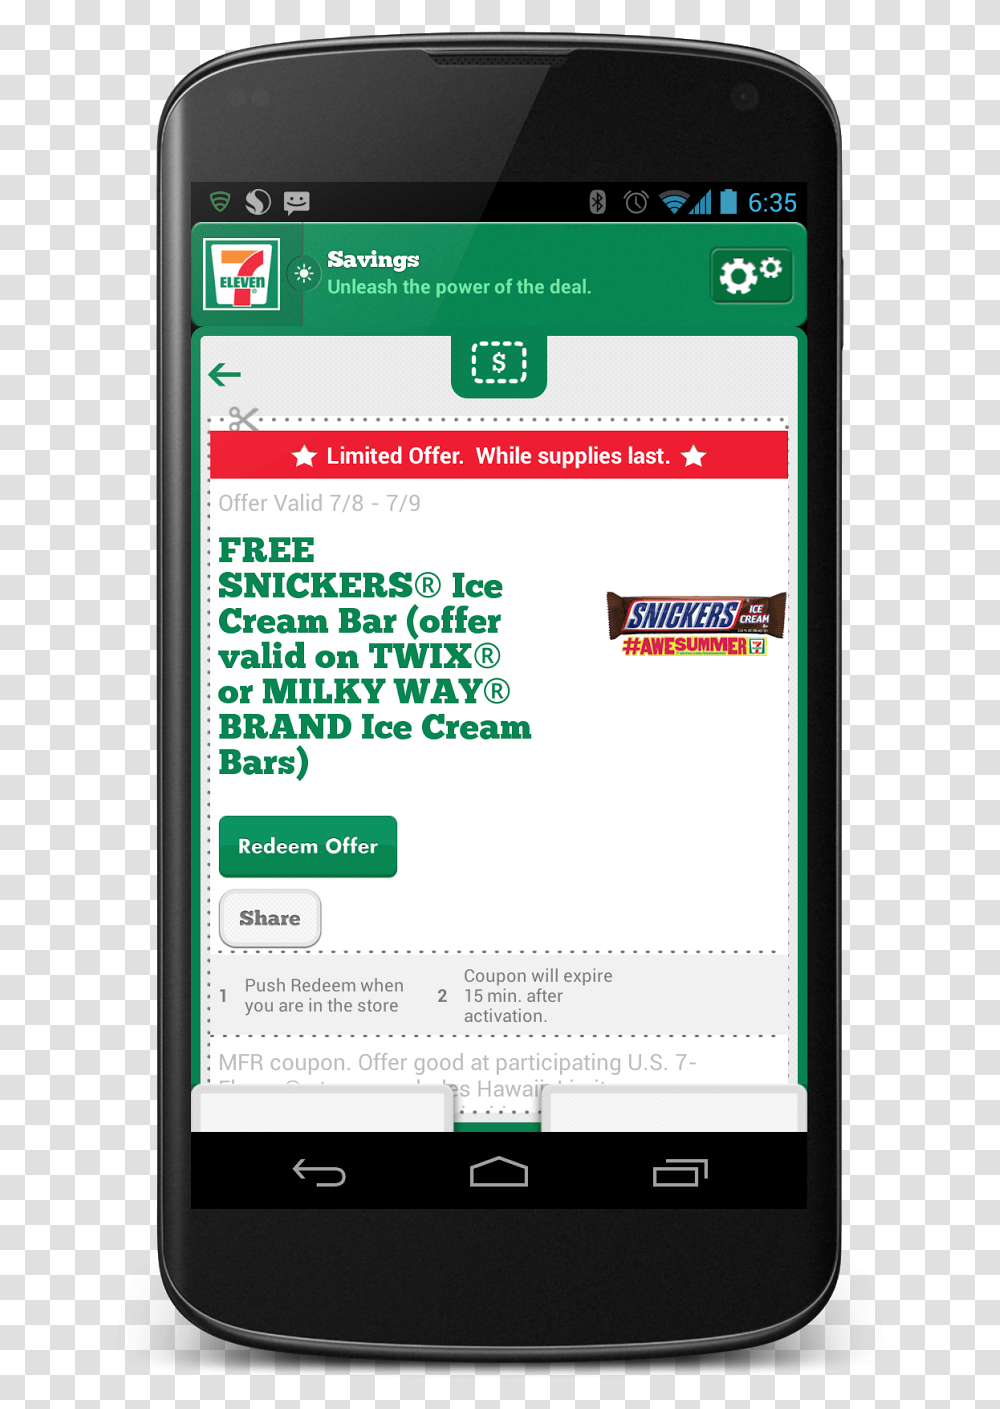 Hurry For Your Free Snickers Ice Cream Bar While Supplies 7 Eleven App Coupon, Mobile Phone, Electronics, Cell Phone Transparent Png